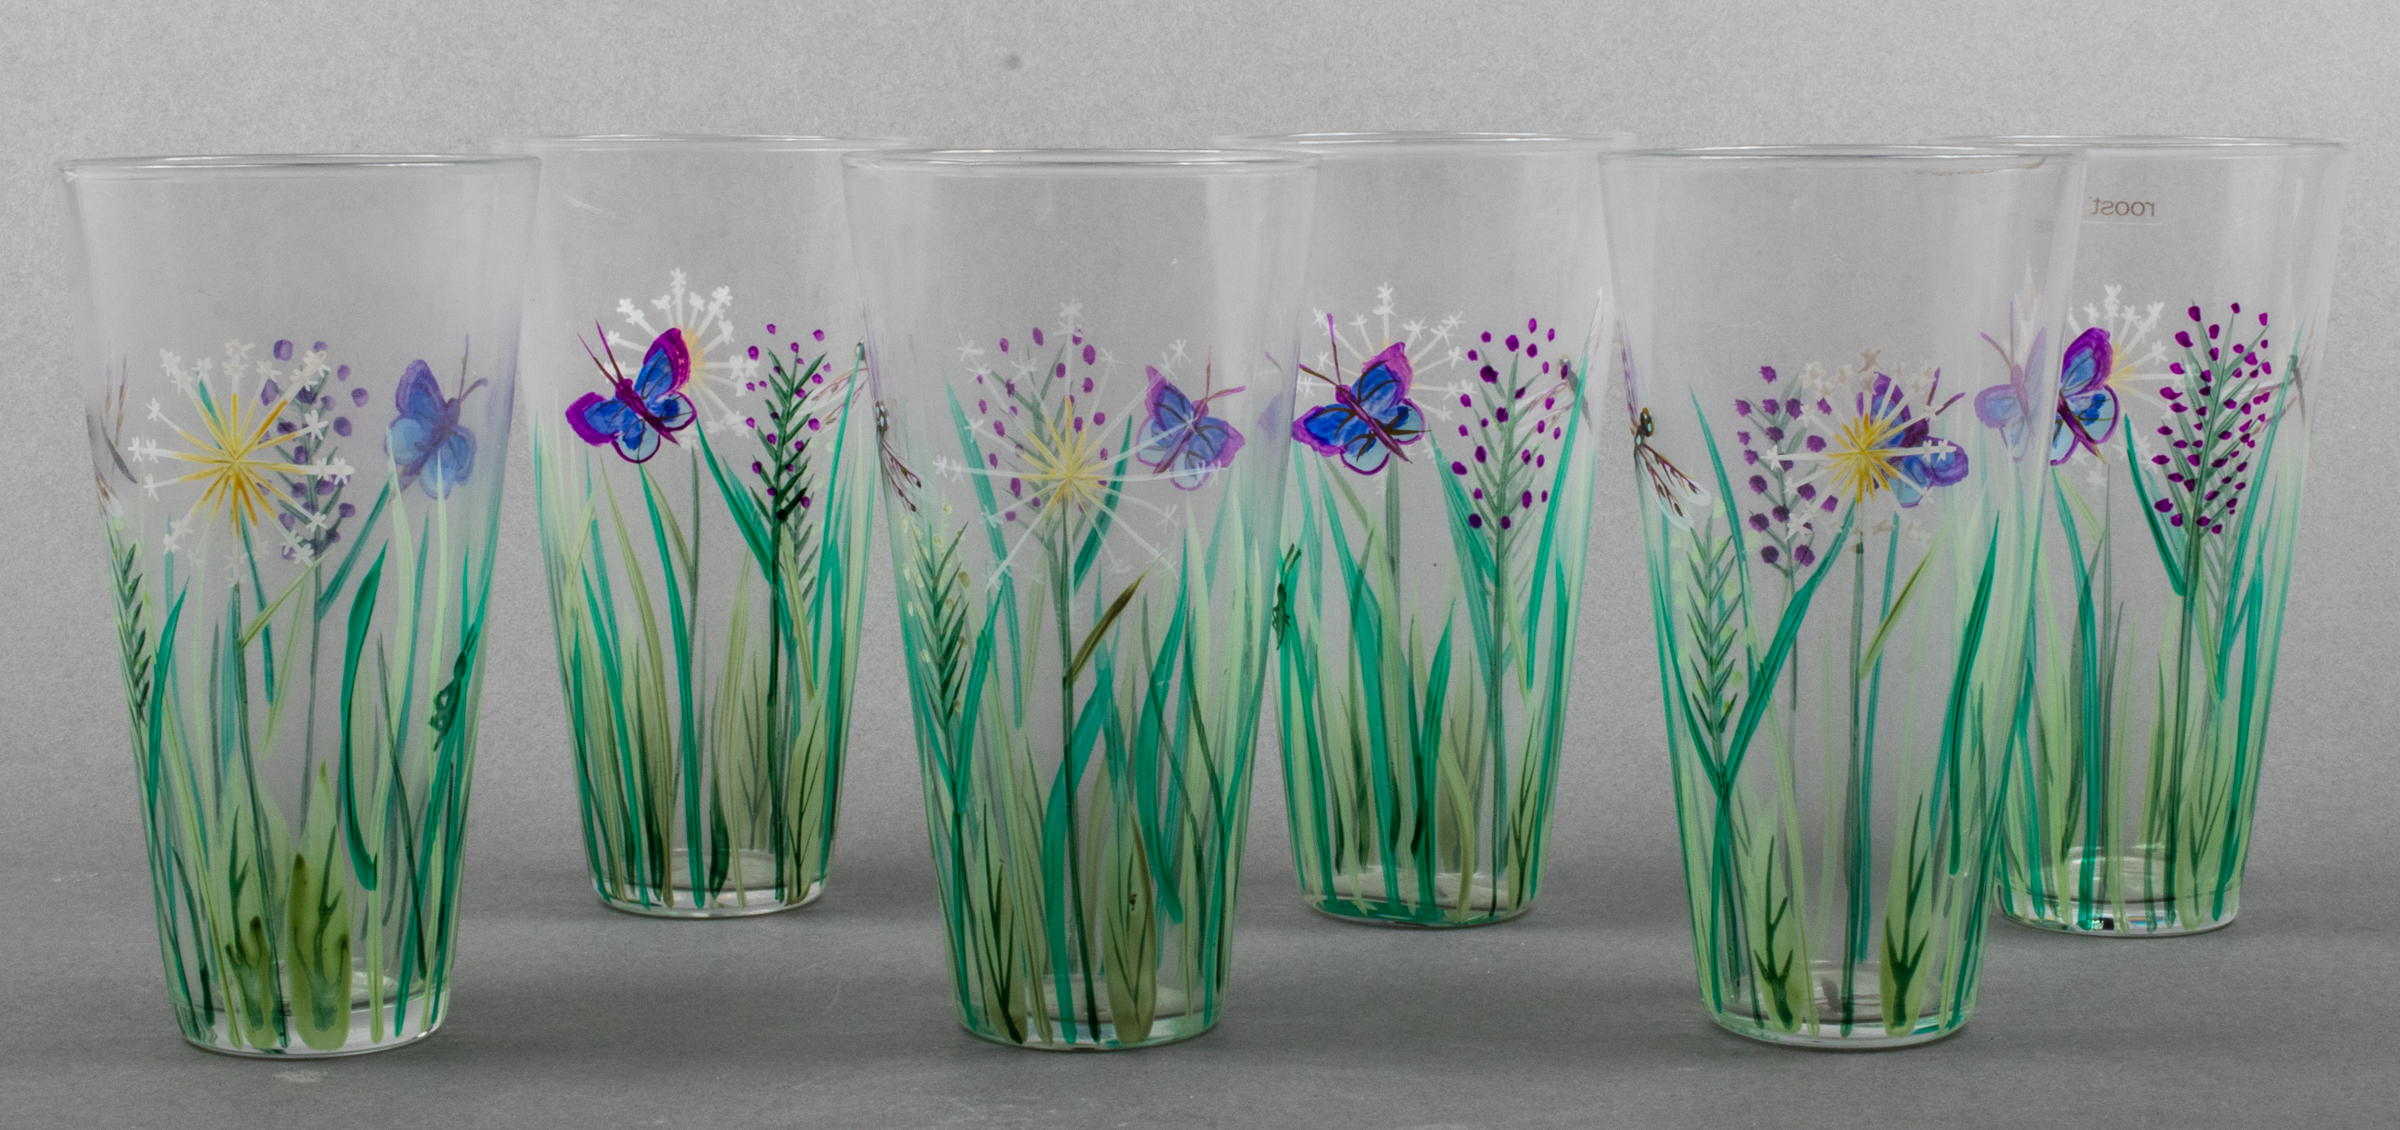 ROOST HAND PAINTED GLASSES, 6 A